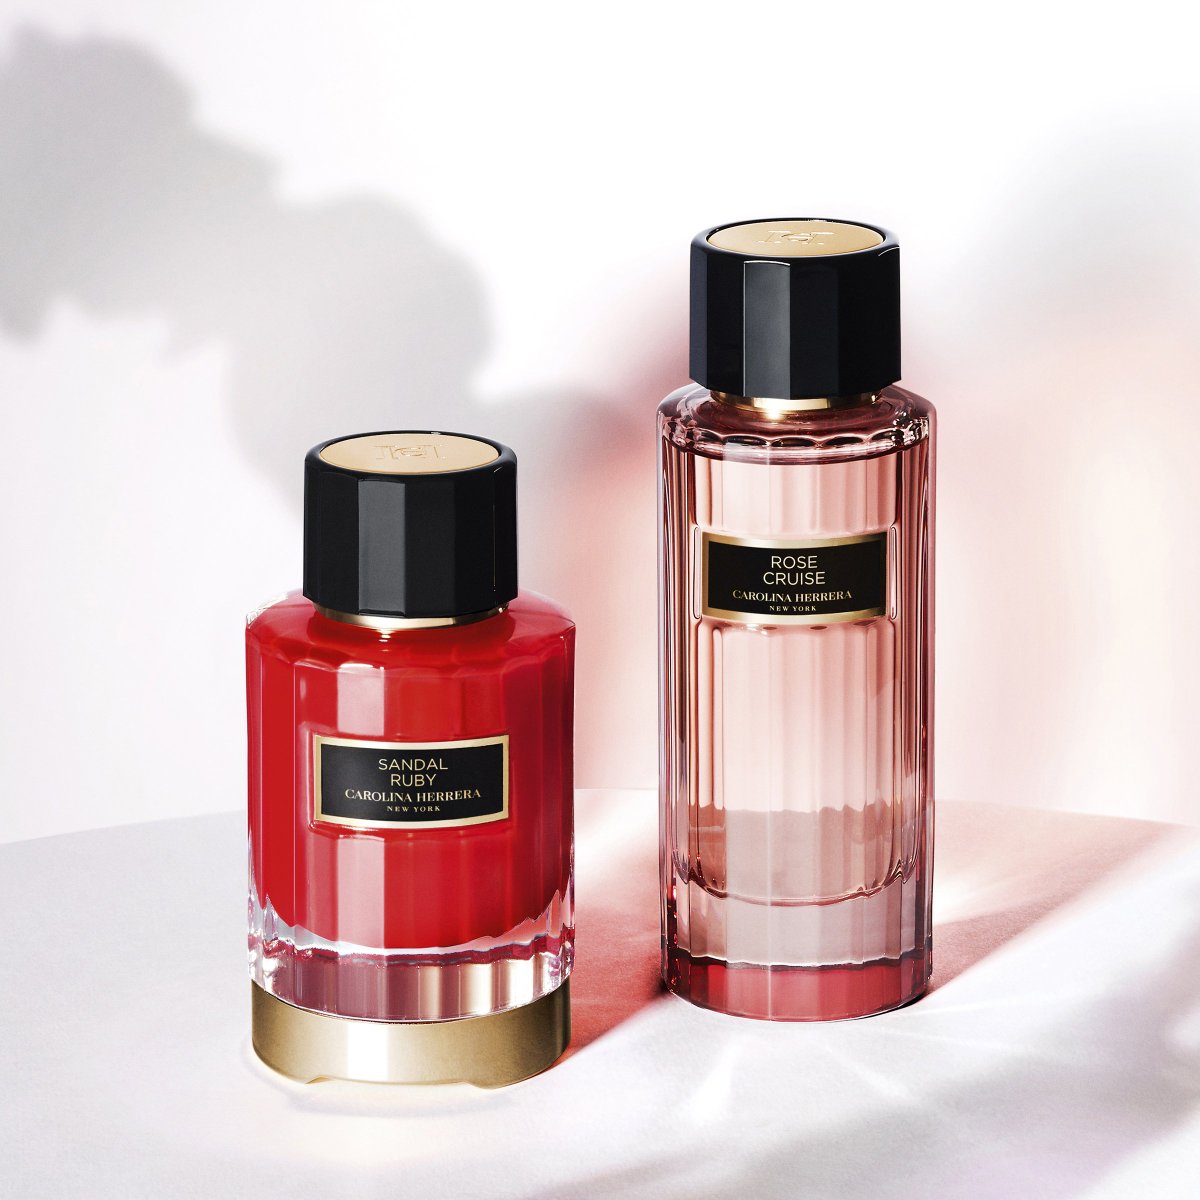 important Advertisement Word Carolina Herrera on Twitter: "Sandal Ruby blends with Rose Cruise to  enliven notes of amber and flora for a uniquely youthful result. Combine  your favorite Confidential scents with our new layering tool